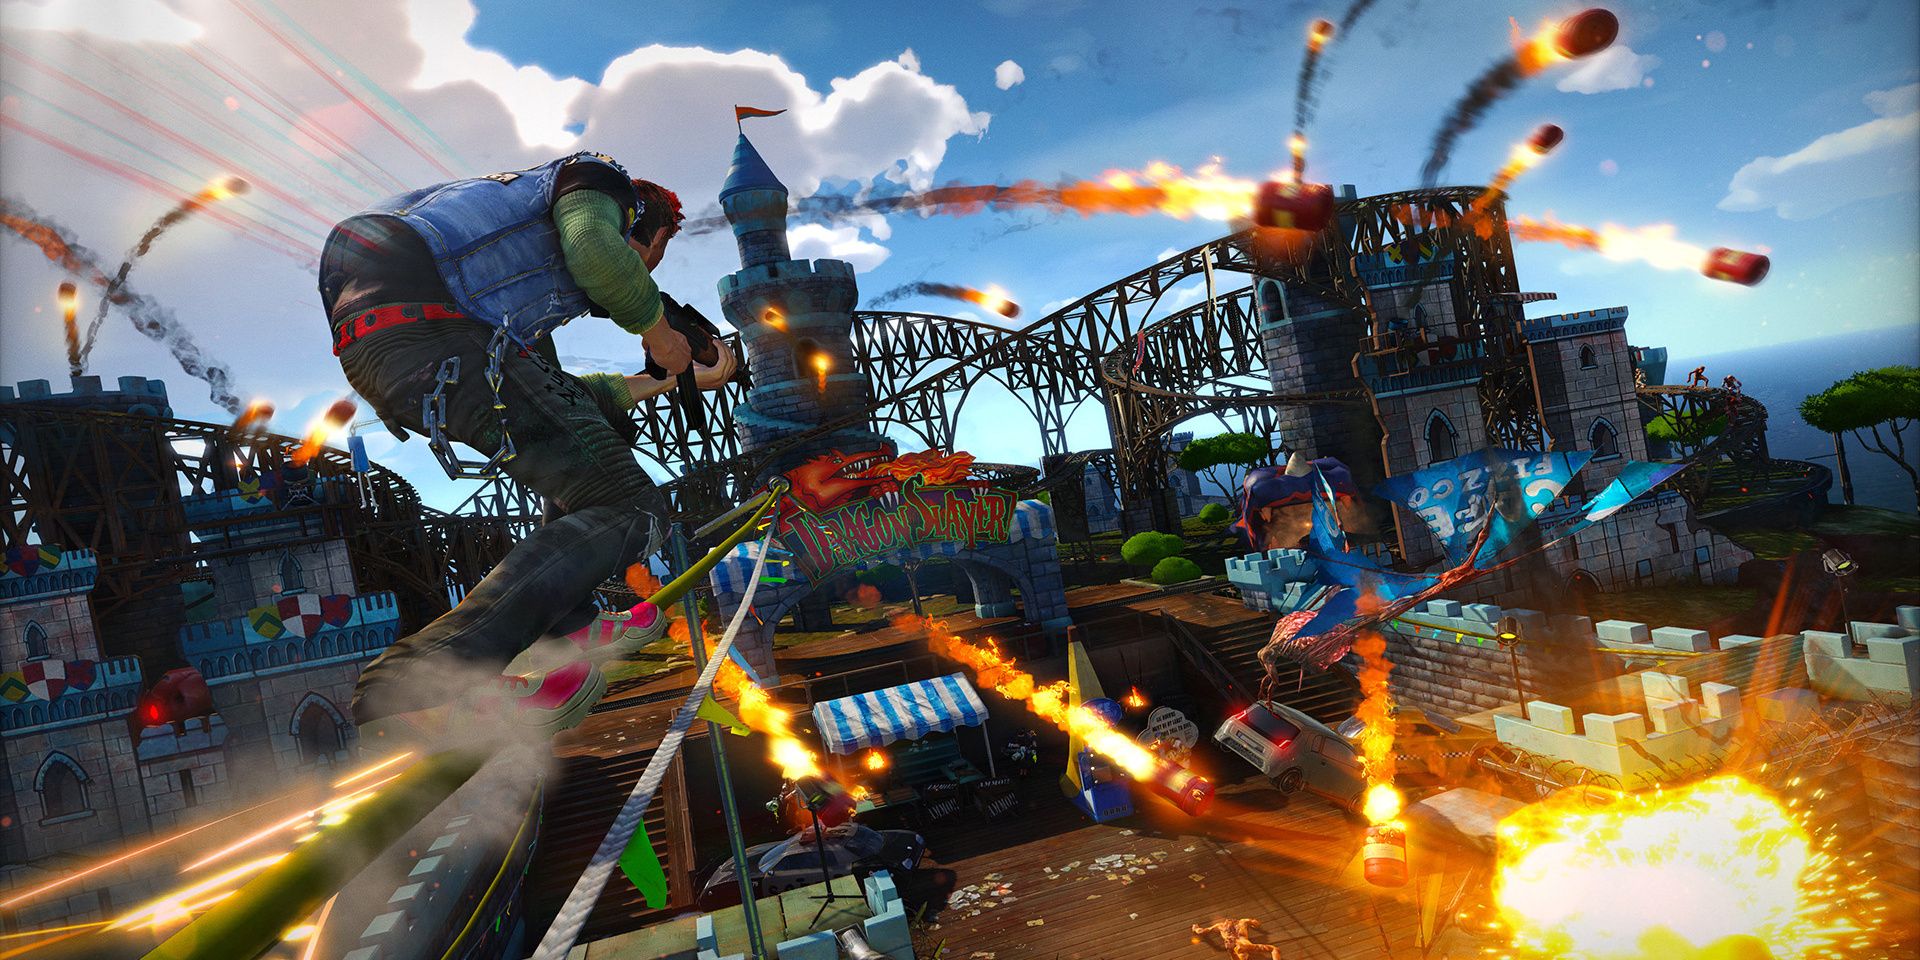 Player grinds on a rail with rockets flying and explosions everywhere at the Amusement Park in Sunset Overdrive